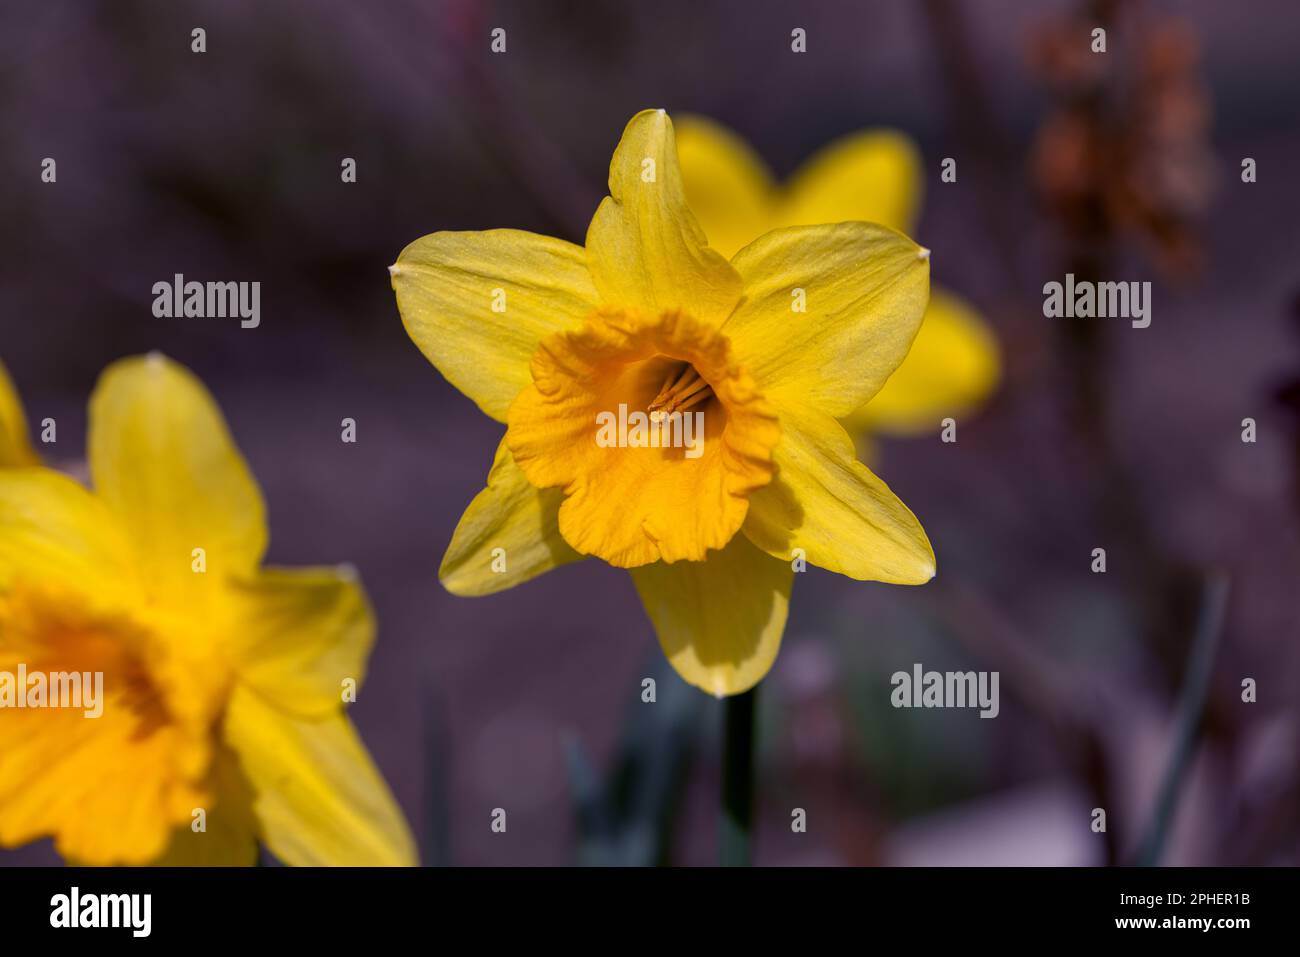 Flowers of yellow narcissus. Wonderful beautiful first spring flowers close-up in good quality. Beautiful floral background for a romantic greeting ca Stock Photo